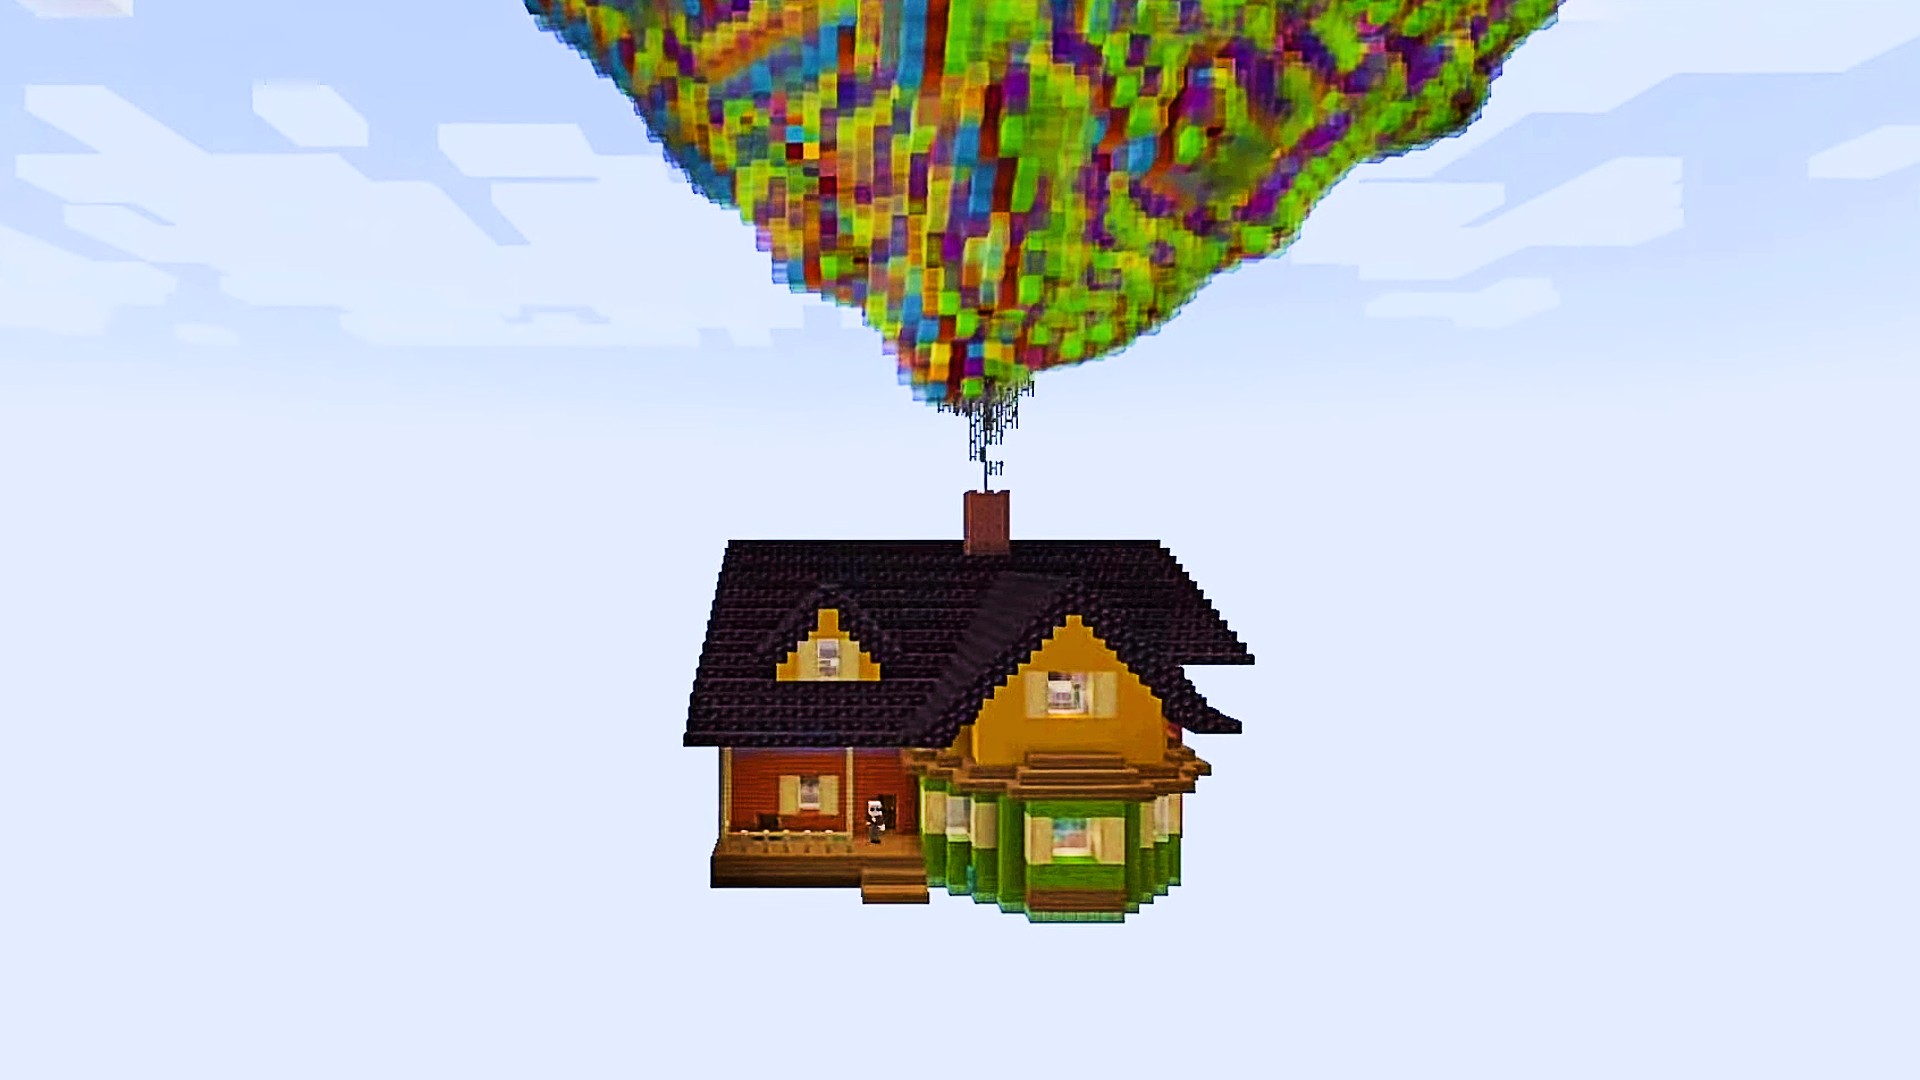 Fans make Minecraft build of Carl & Ellie's house from Up | PCGamesN